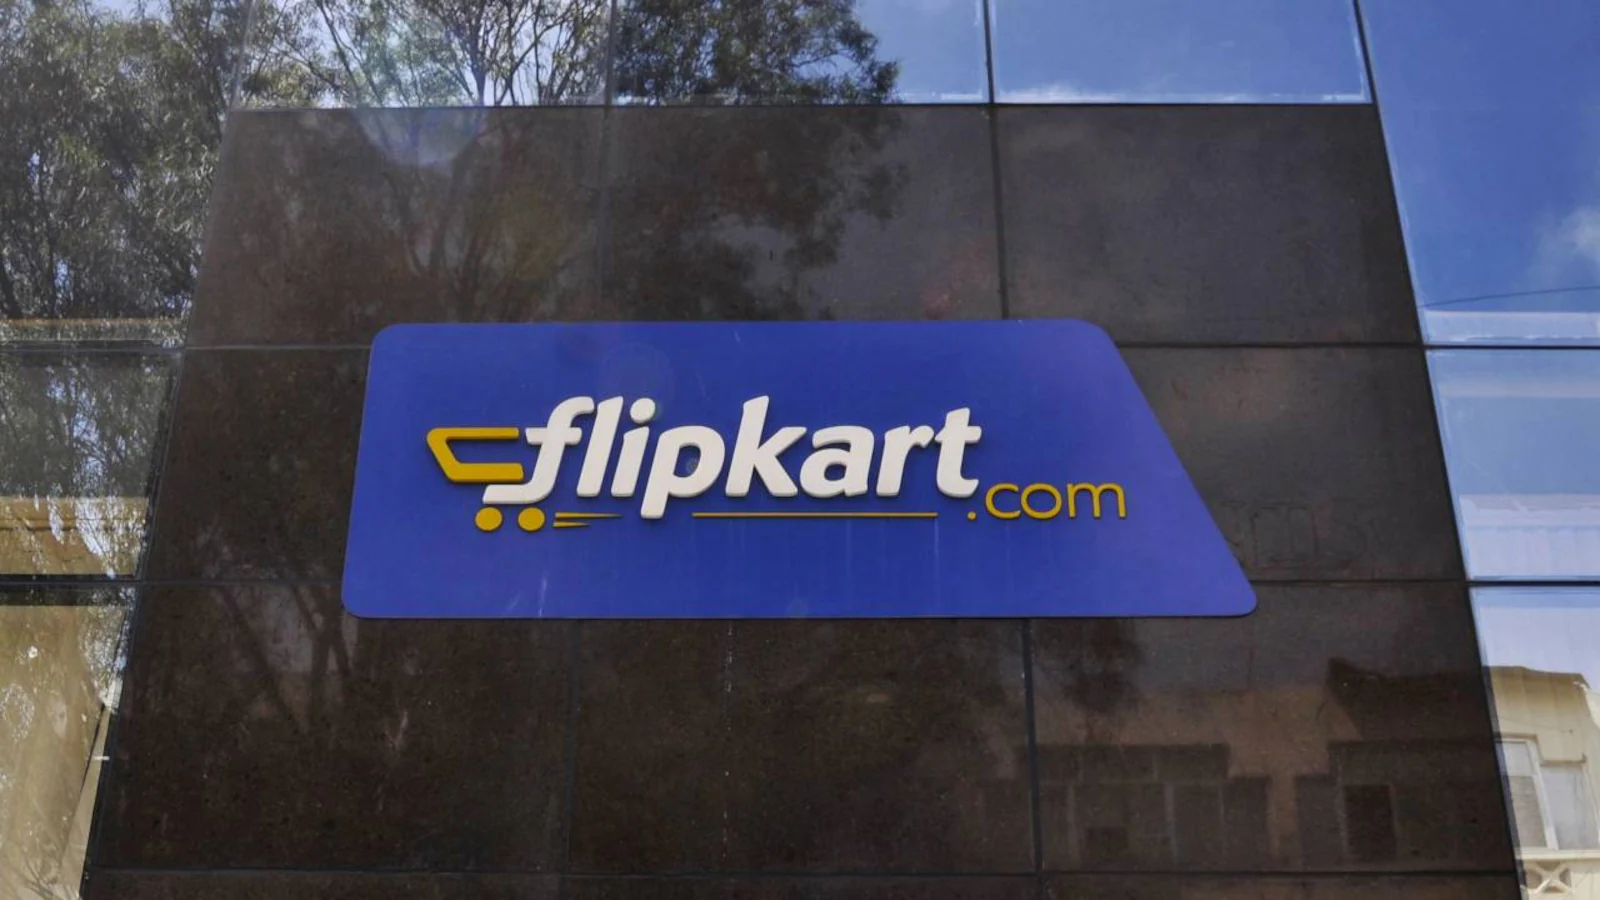 Flipkart Launches the Exchange Program for Used Air Conditioners